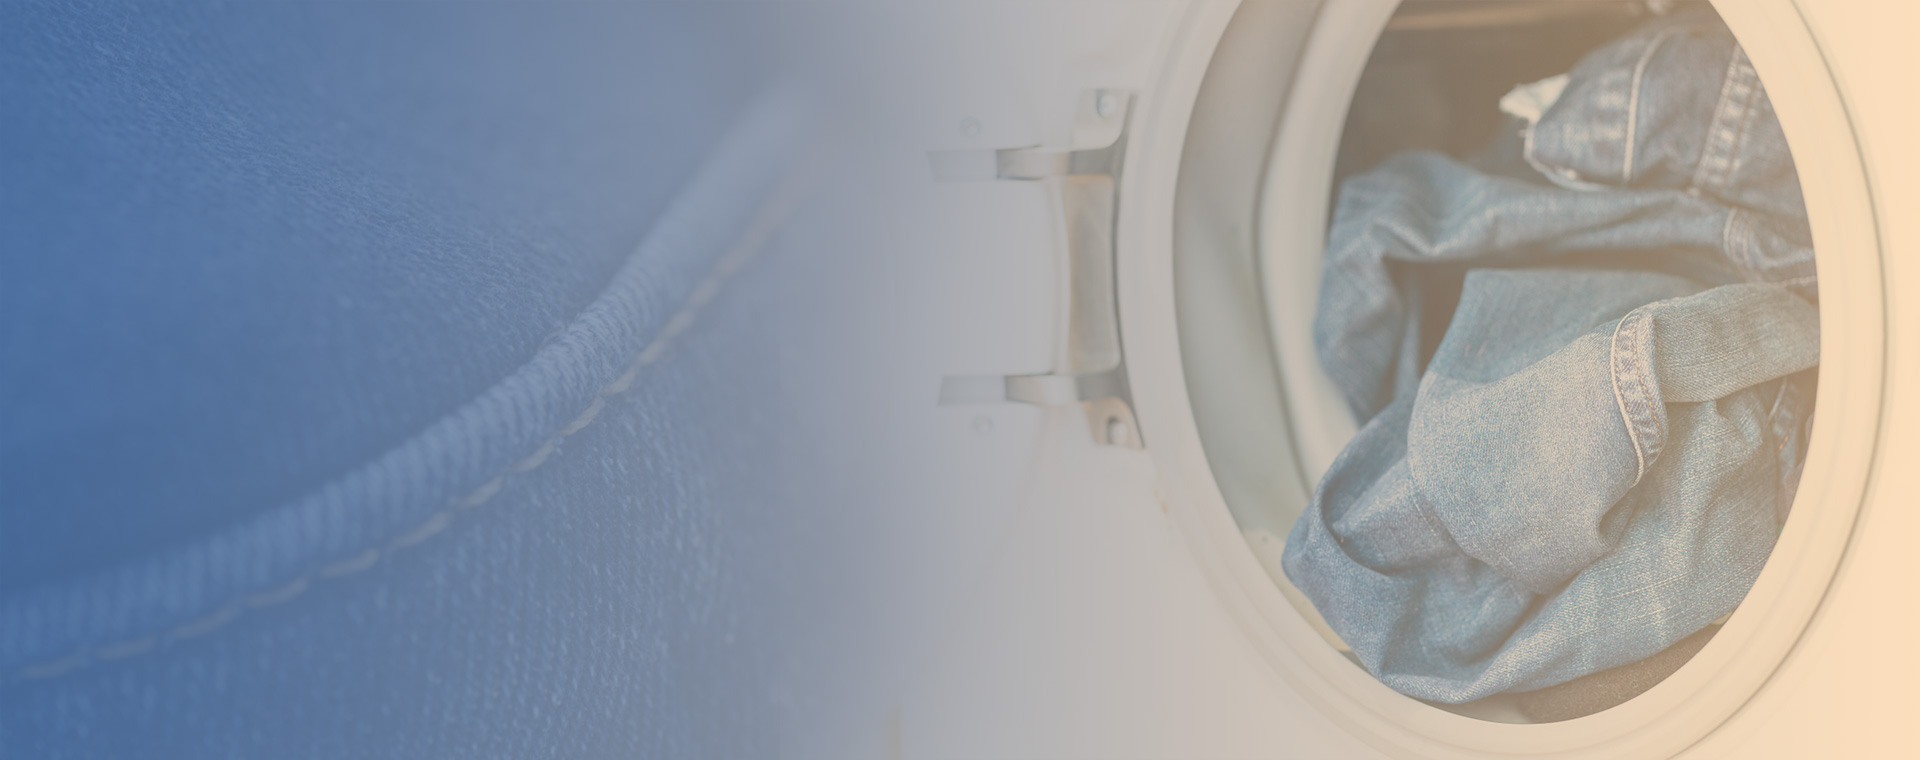 Focusing on textile auxiliaries for denim washing